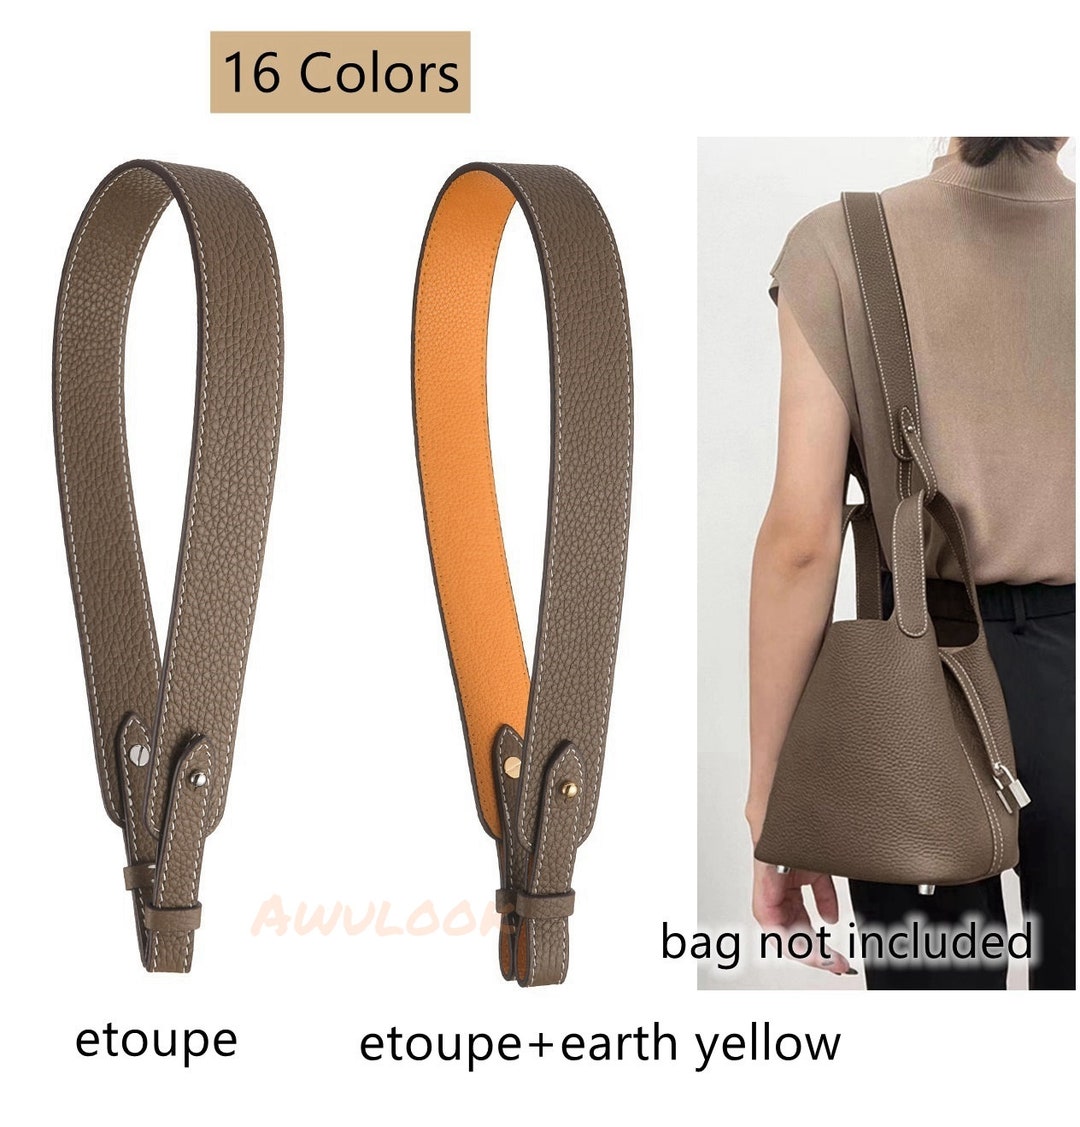 2 Pcs 0.6 inch Sew On Wide PU Leather Purses Straps Adjustable Handbags  Shoulder Bag Strap Replacement Handles Purse, Brown